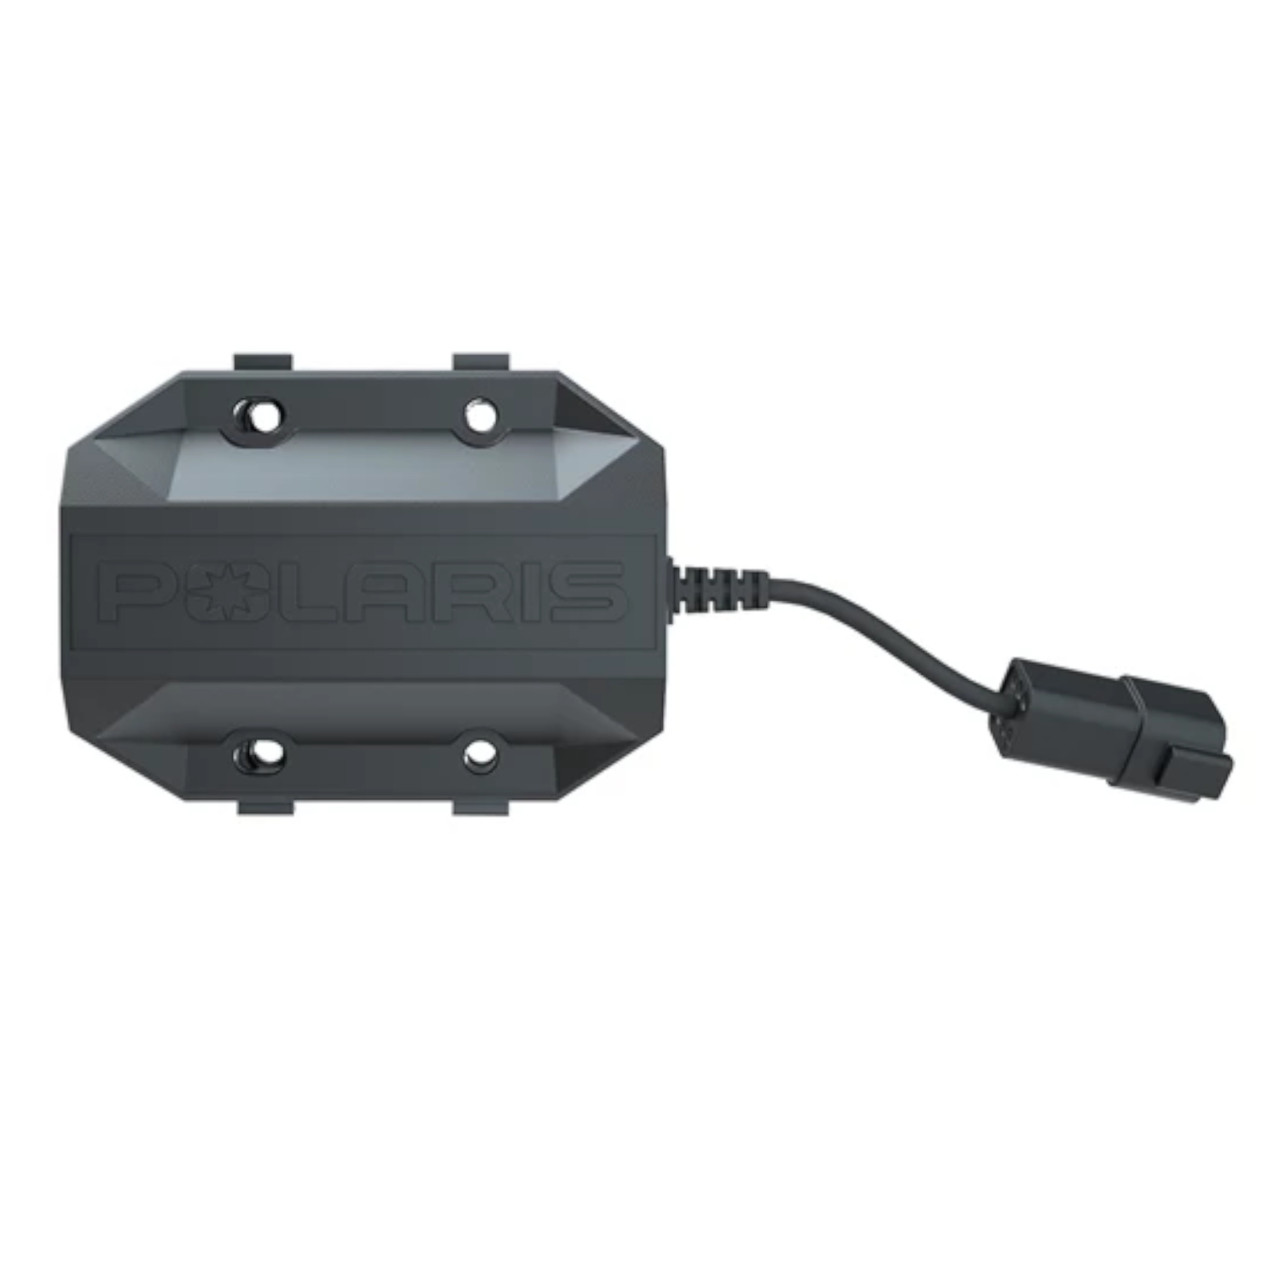 Polaris New OEM RIDE COMMAND+ Connected Vehicle Plug-In, 2890038